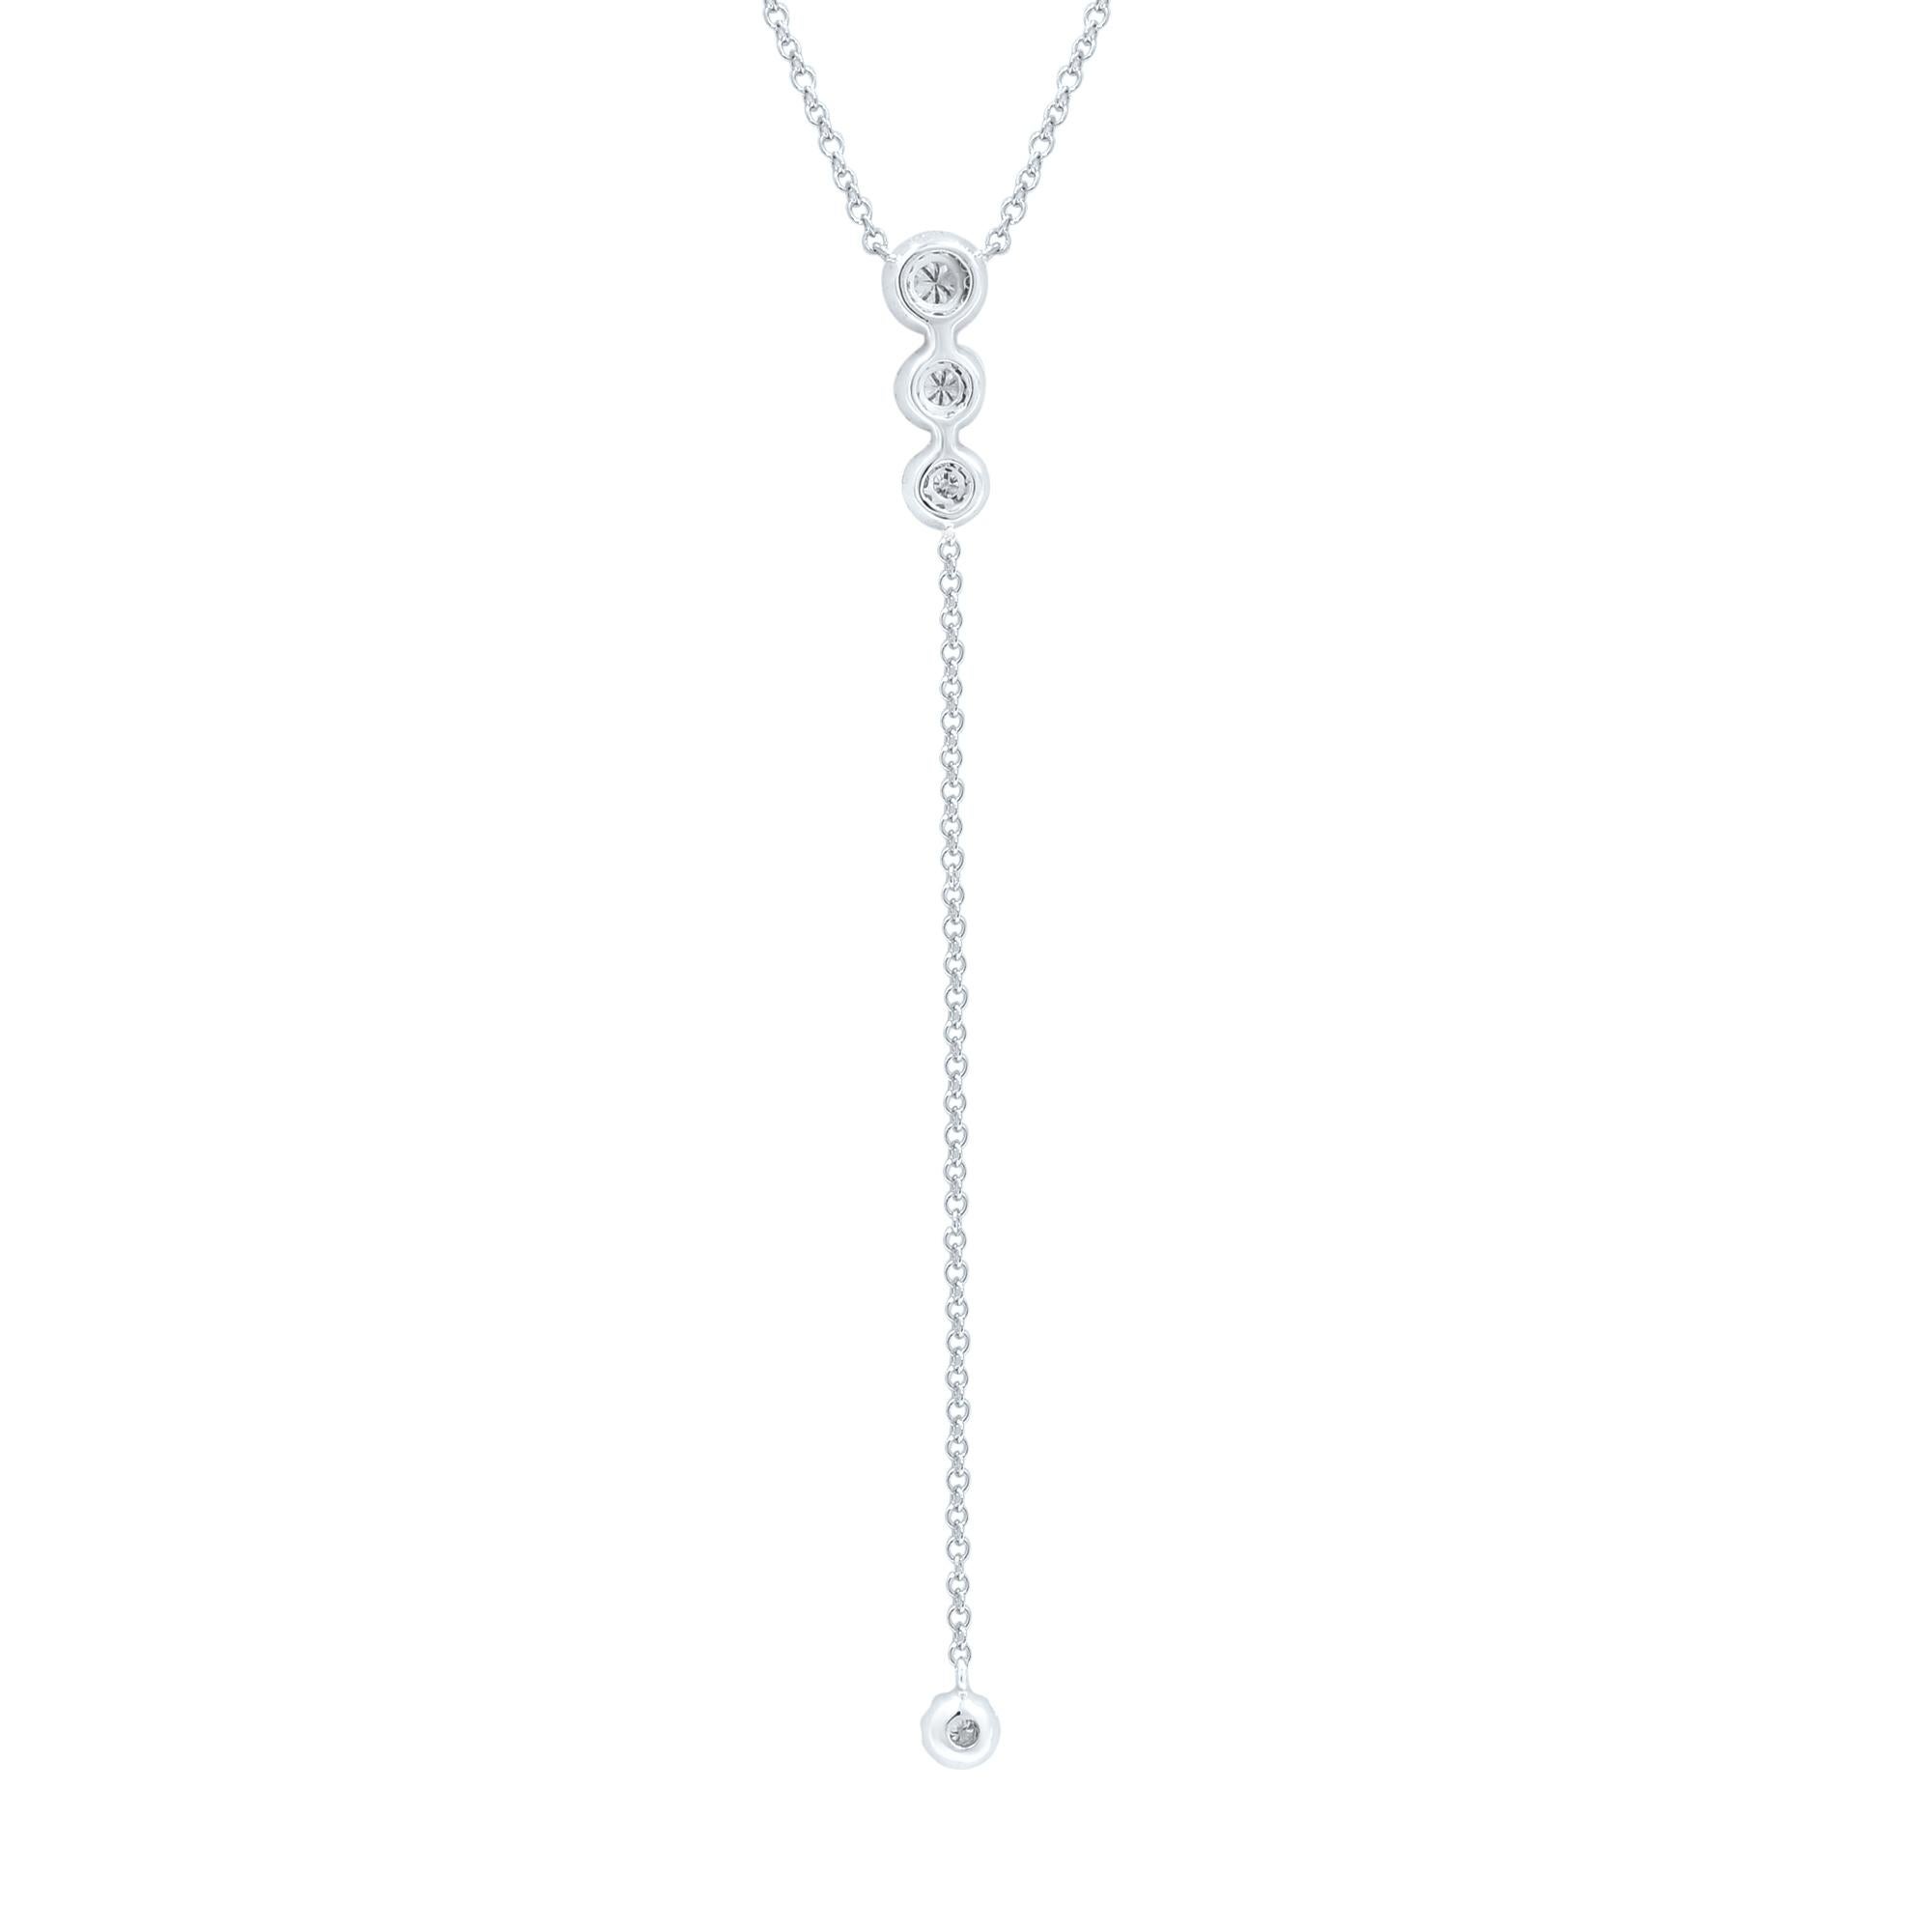 This precious diamond necklace will leave everyone speechless the moment they see it. Crafted in high polished solid 14k white gold, this necklace is set with brilliant round cut diamonds of G-H color and clean VS clarity. Diamond Weight: 0.29